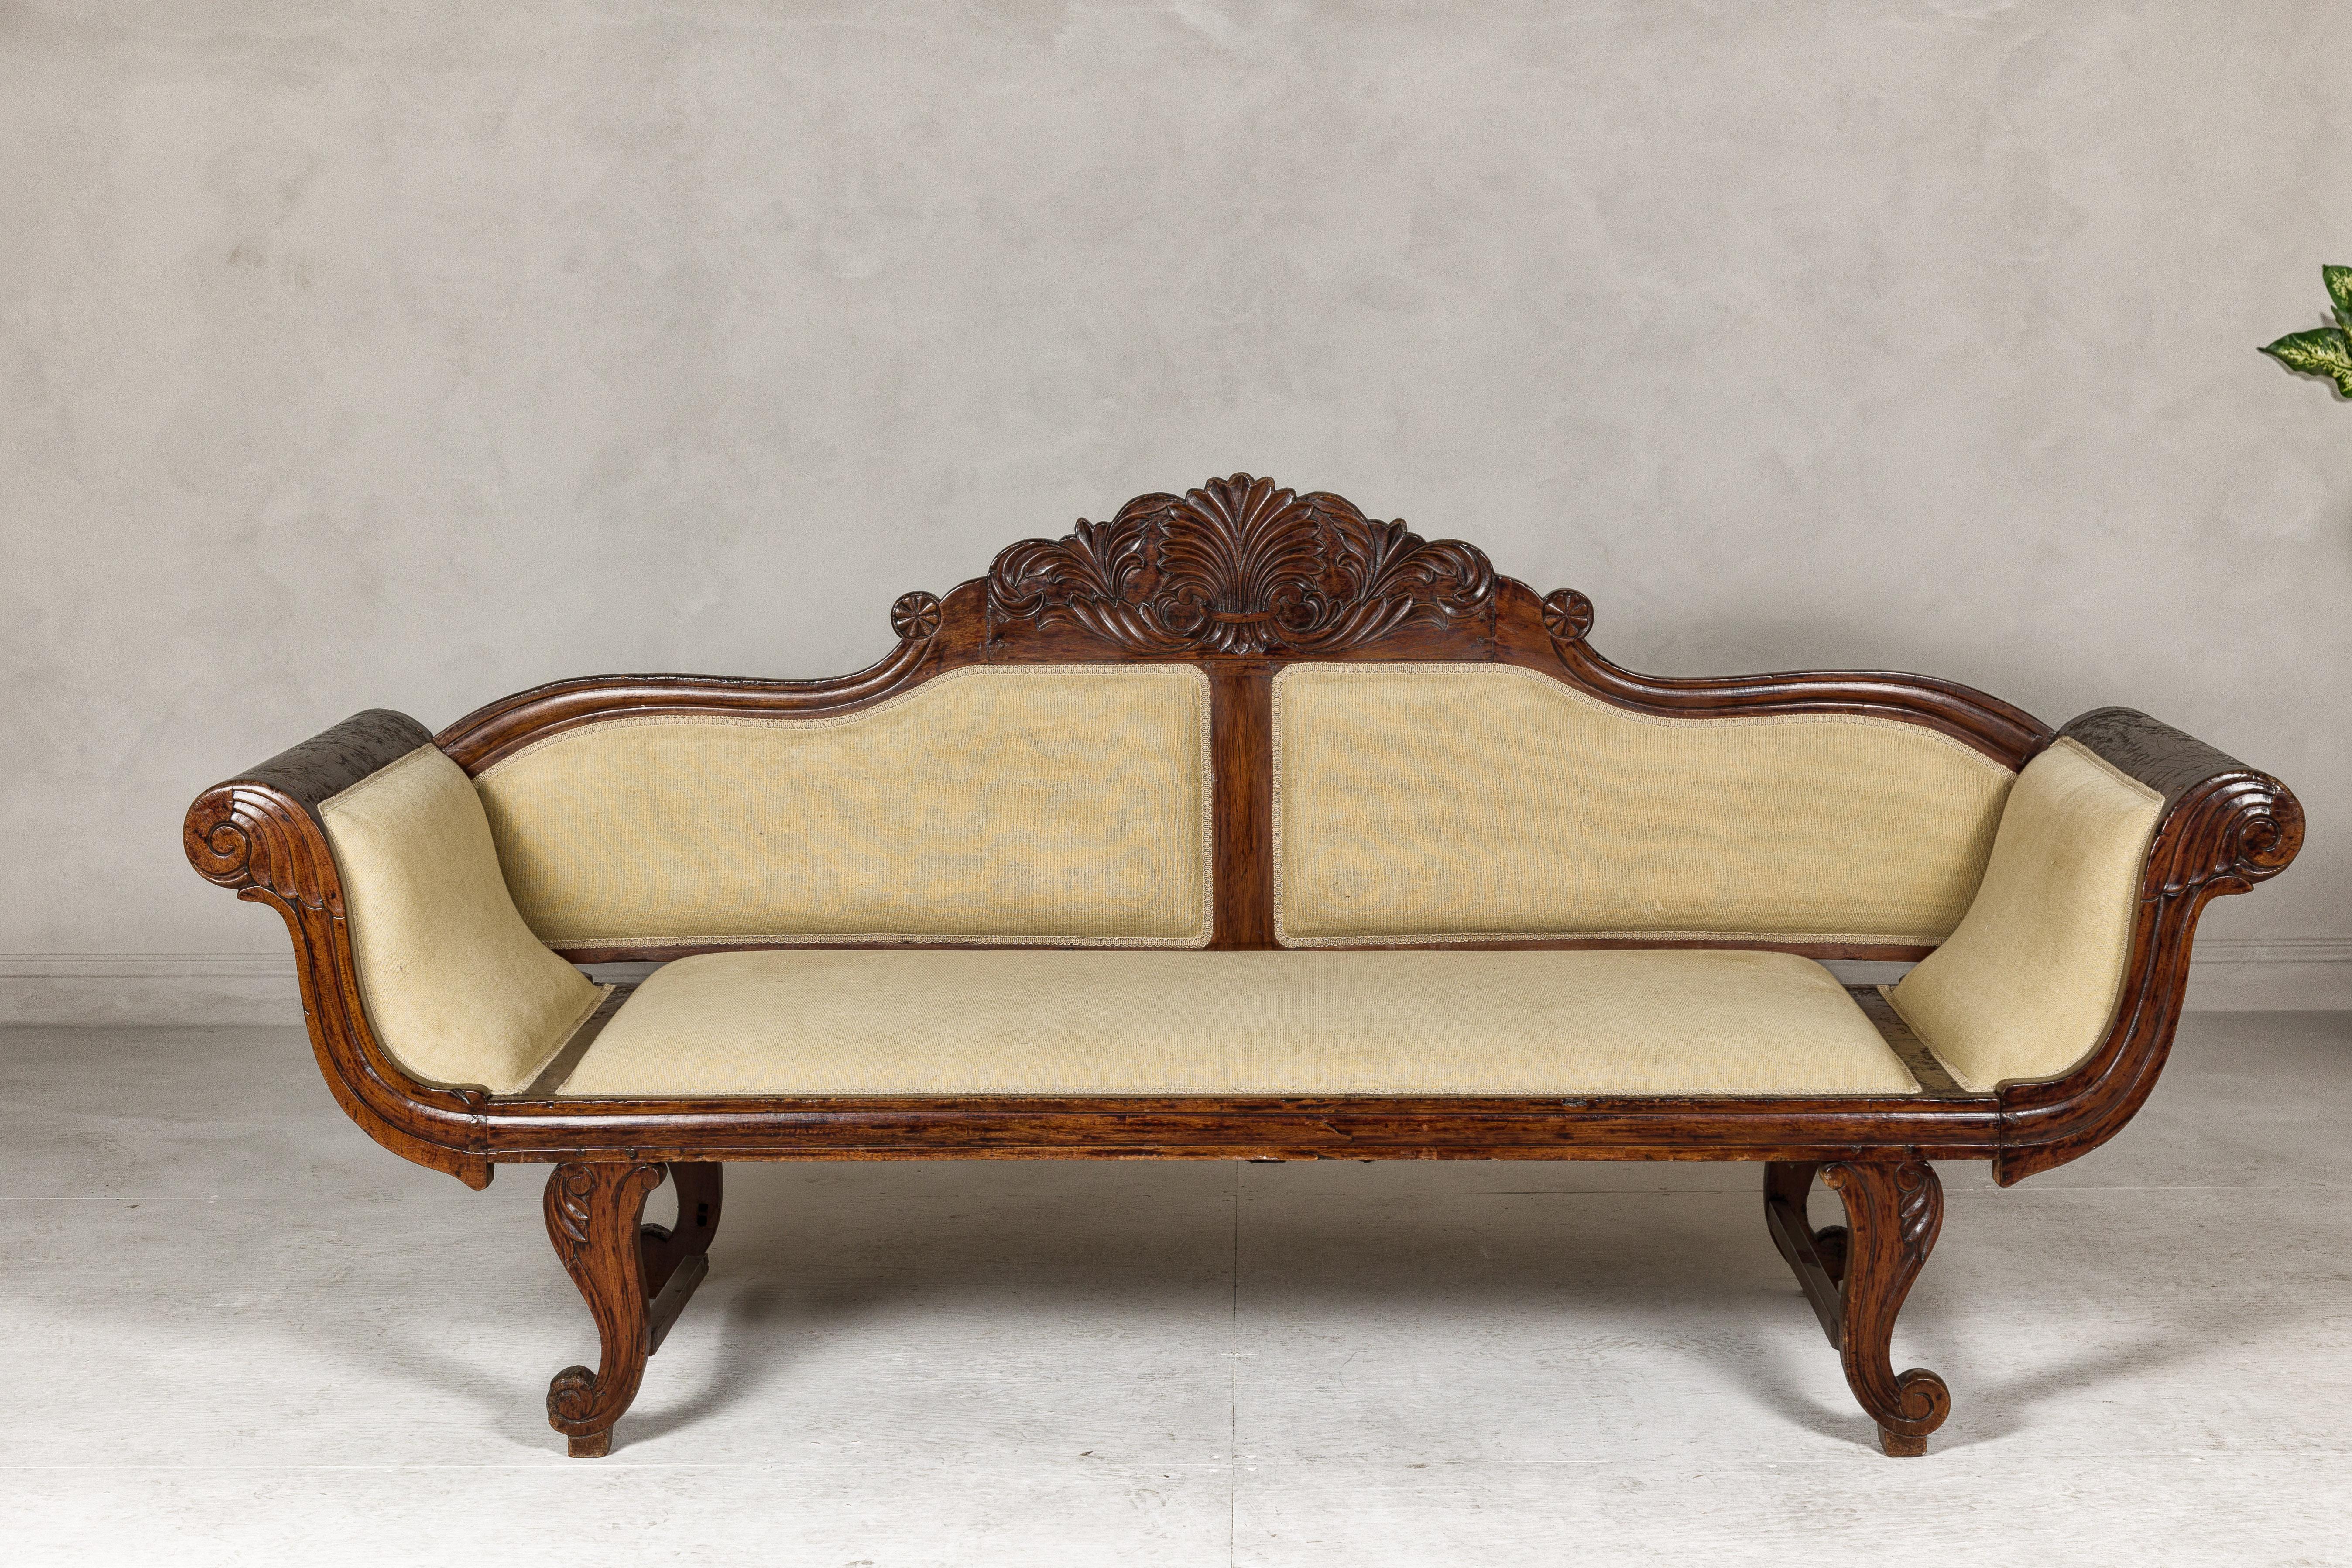 A Dutch Colonial period wooden settee from the early 20th century with carved crest, out-scrolling arms, cabriole legs and used fabric. This early 20th-century Dutch Colonial period wooden settee from South-East Asia is a fine example of classic